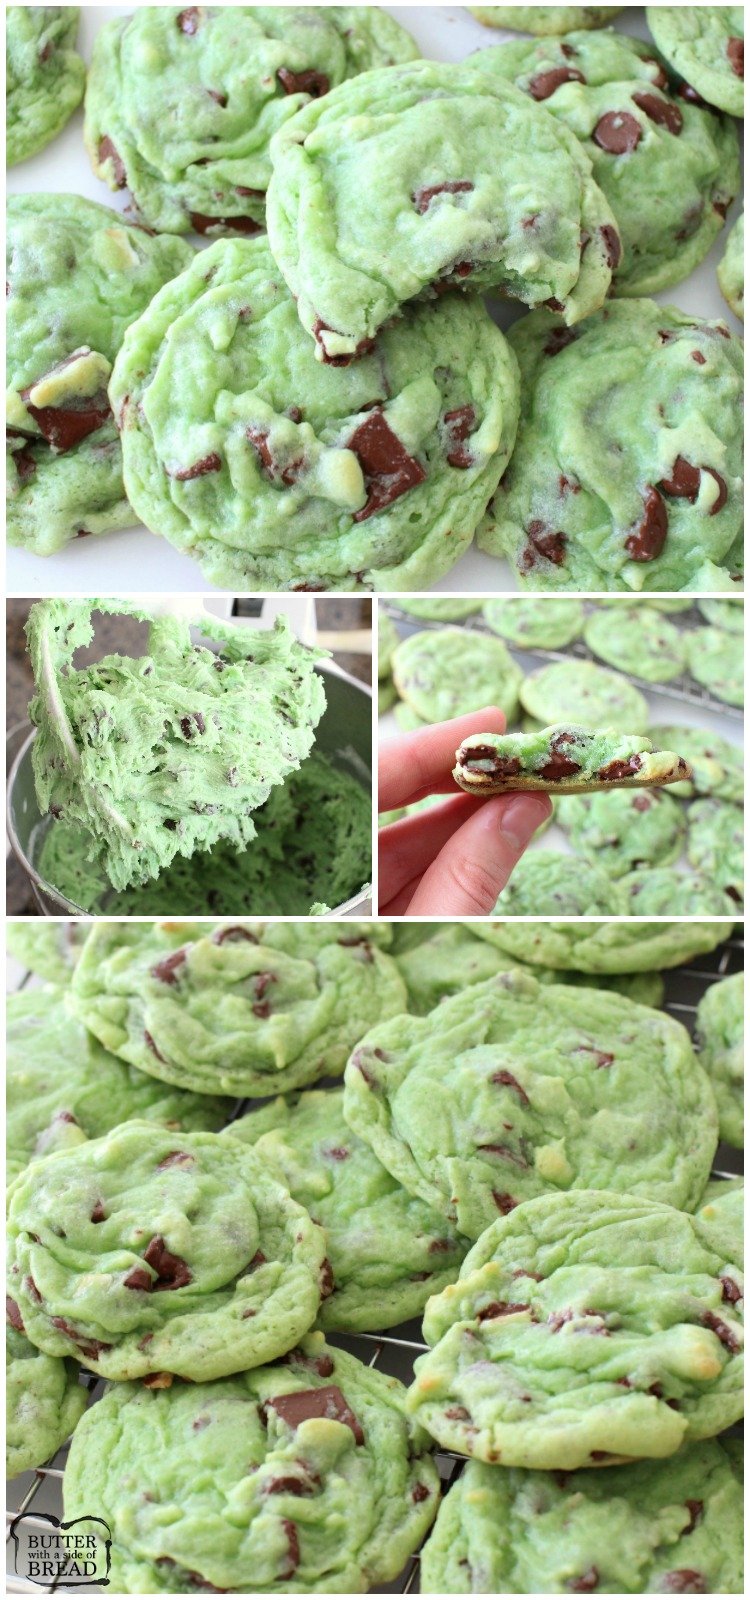 Mint Chocolate Chip Cookies made with pudding mix, mint extract & chocolate chips. Lovely cookie recipe perfect for those who love mint chip ice cream! #mint #chocolate #cookies #green #mintchip #dessert #StPatricksDay #dessert